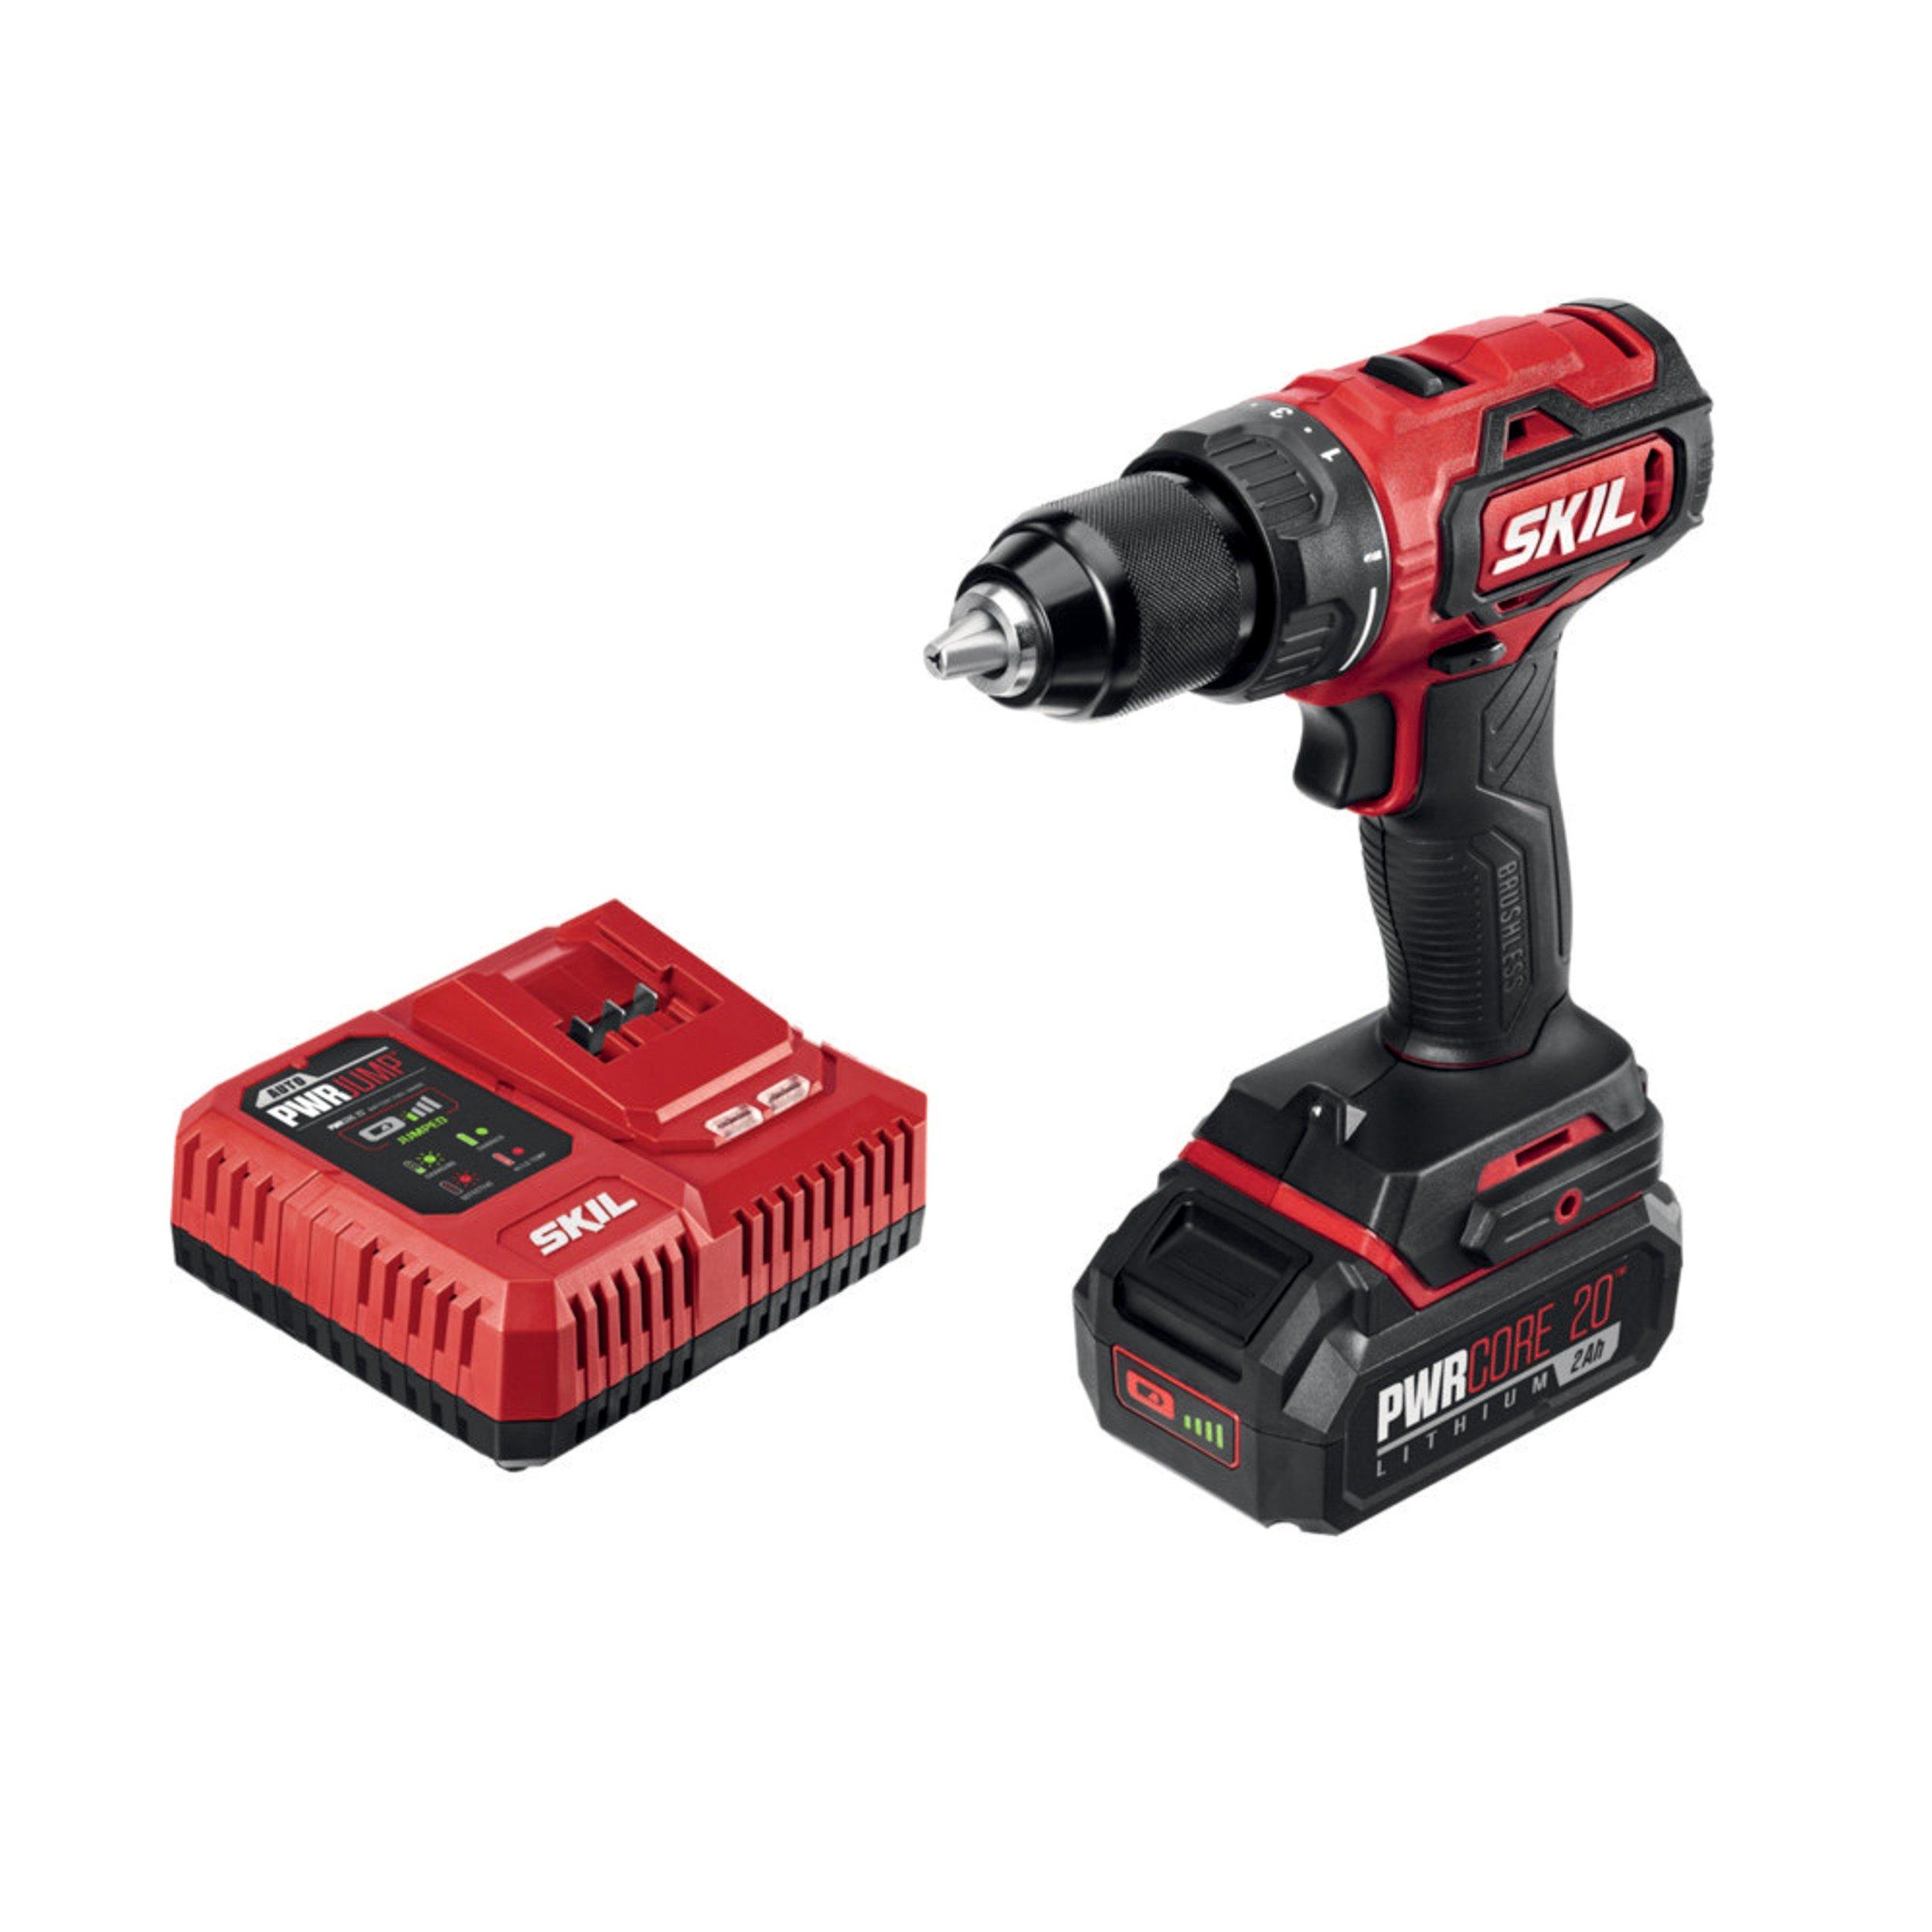 Skil PWR CORE 20 Brushless 20V 1/2 IN. Drill Driver Kit